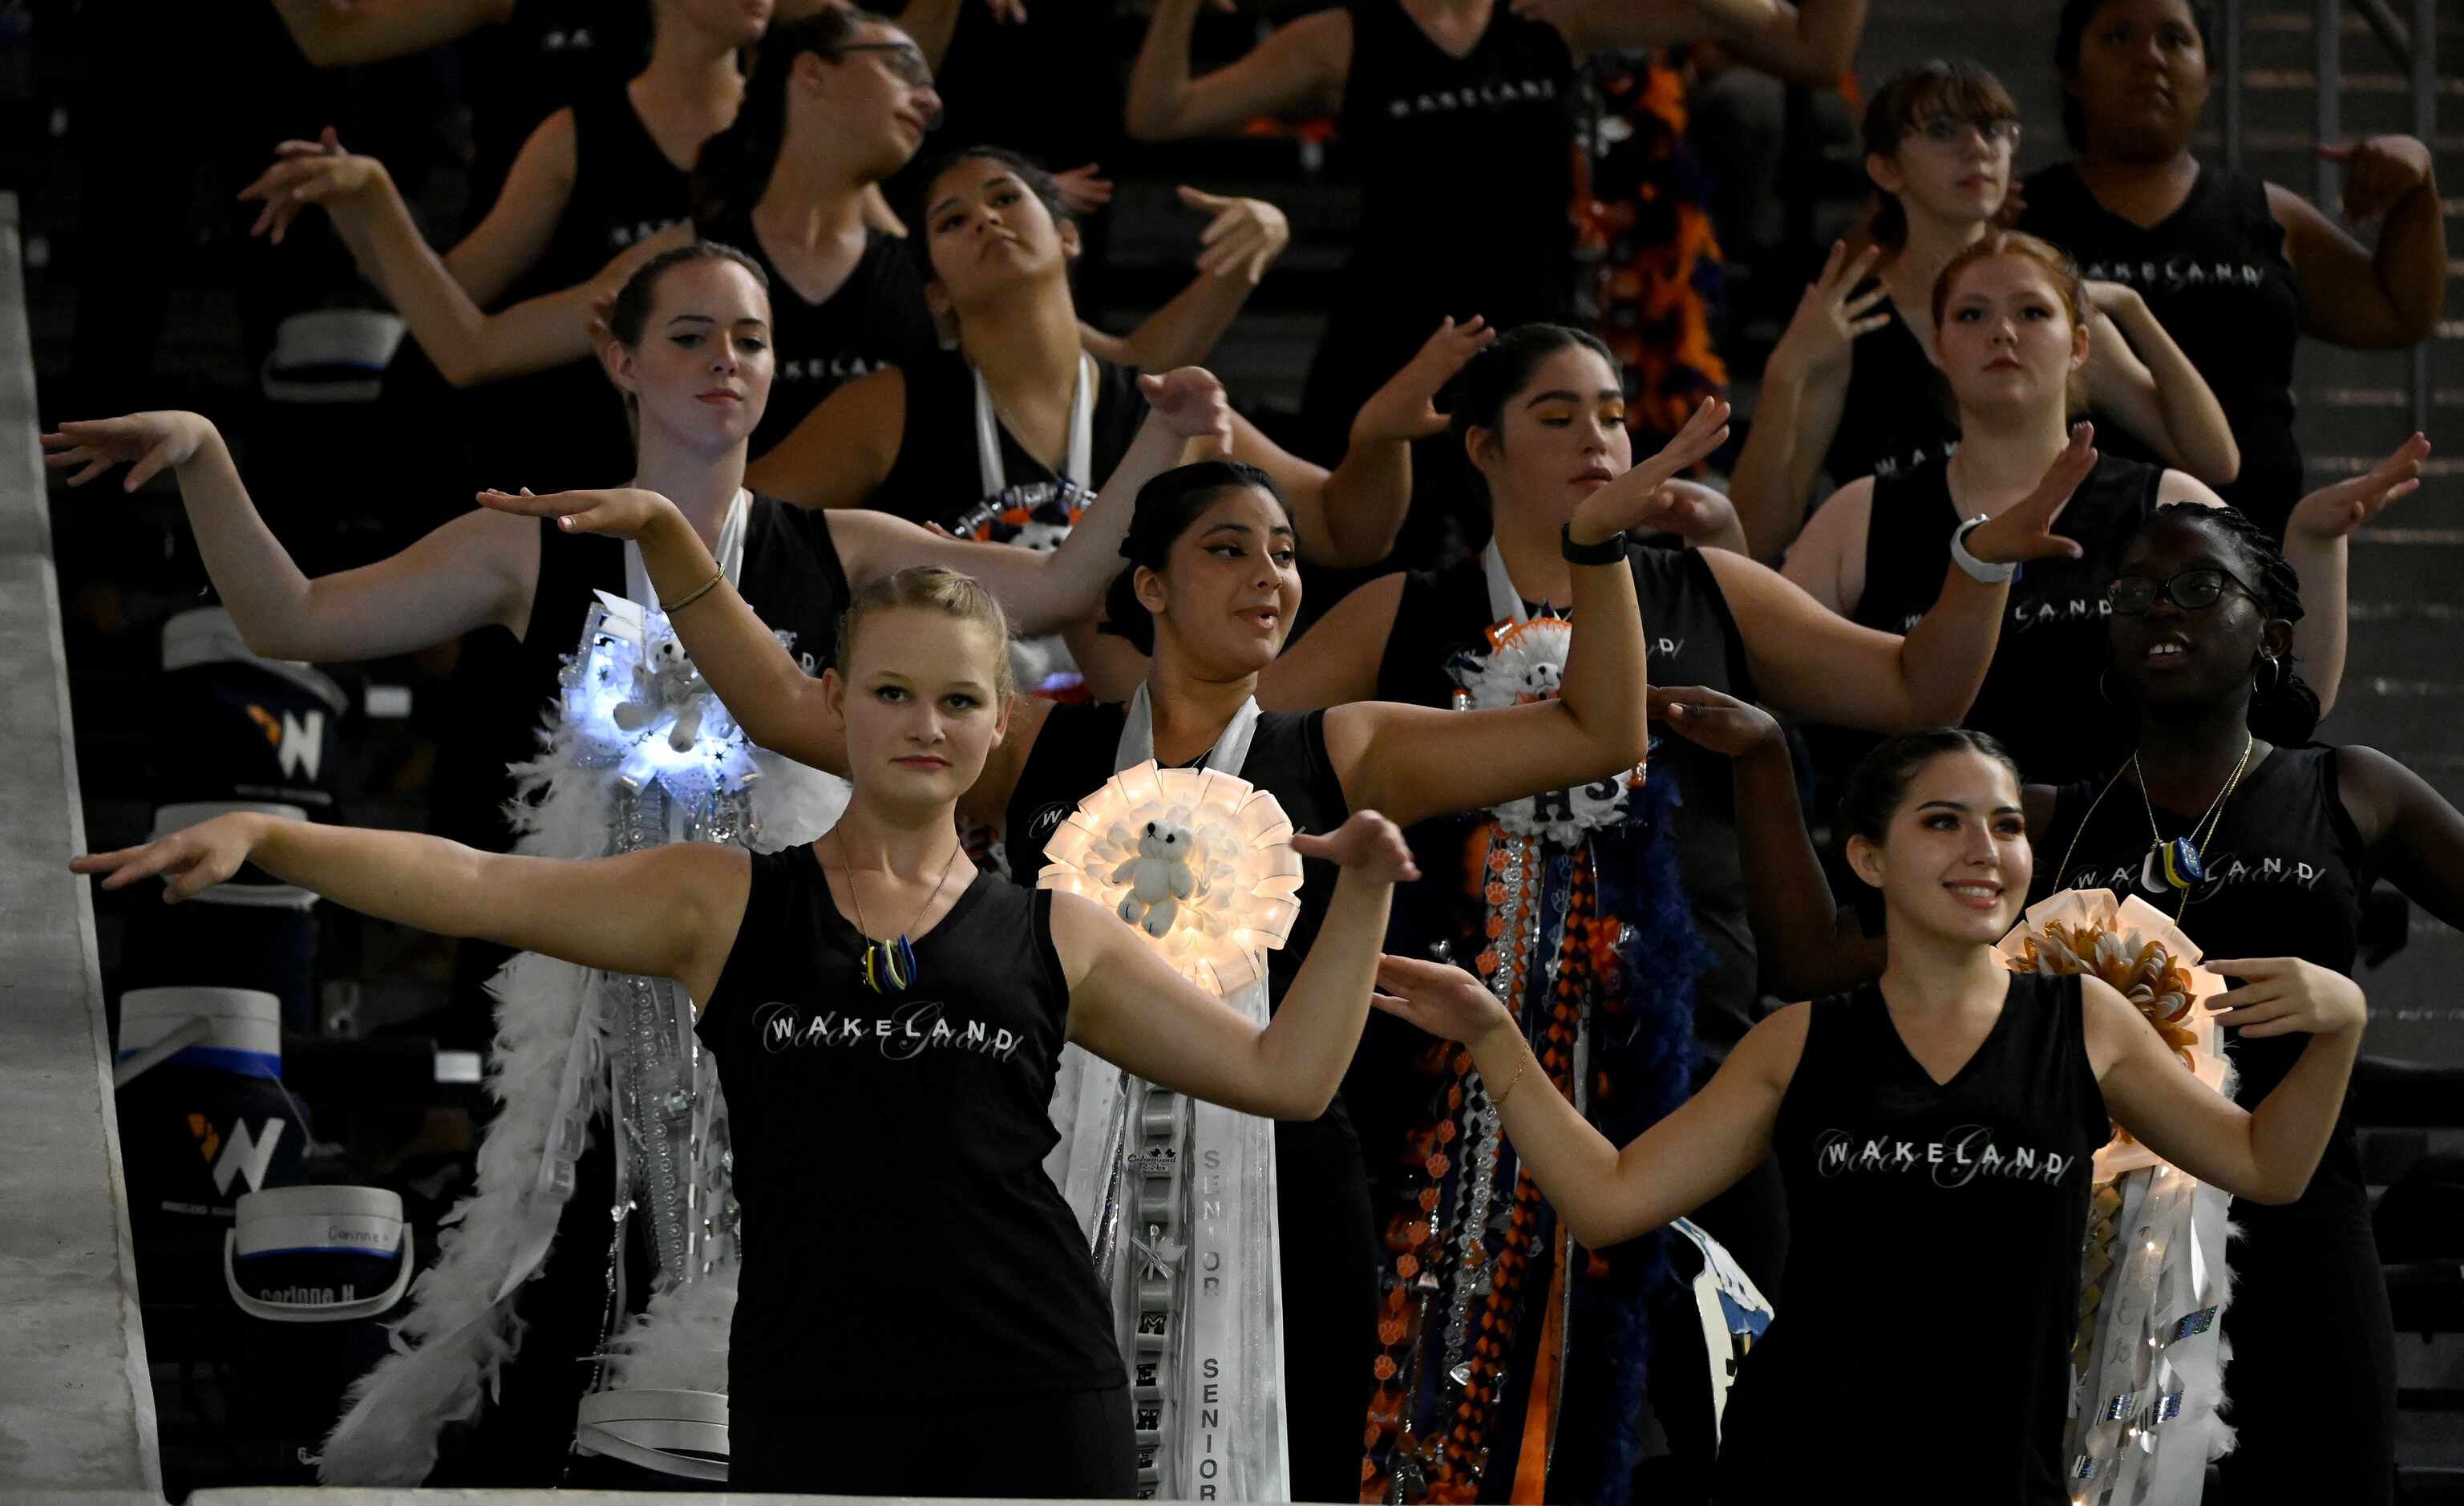 The Frisco Wakeland Color Guard perform in the stands in the first half of a high school...